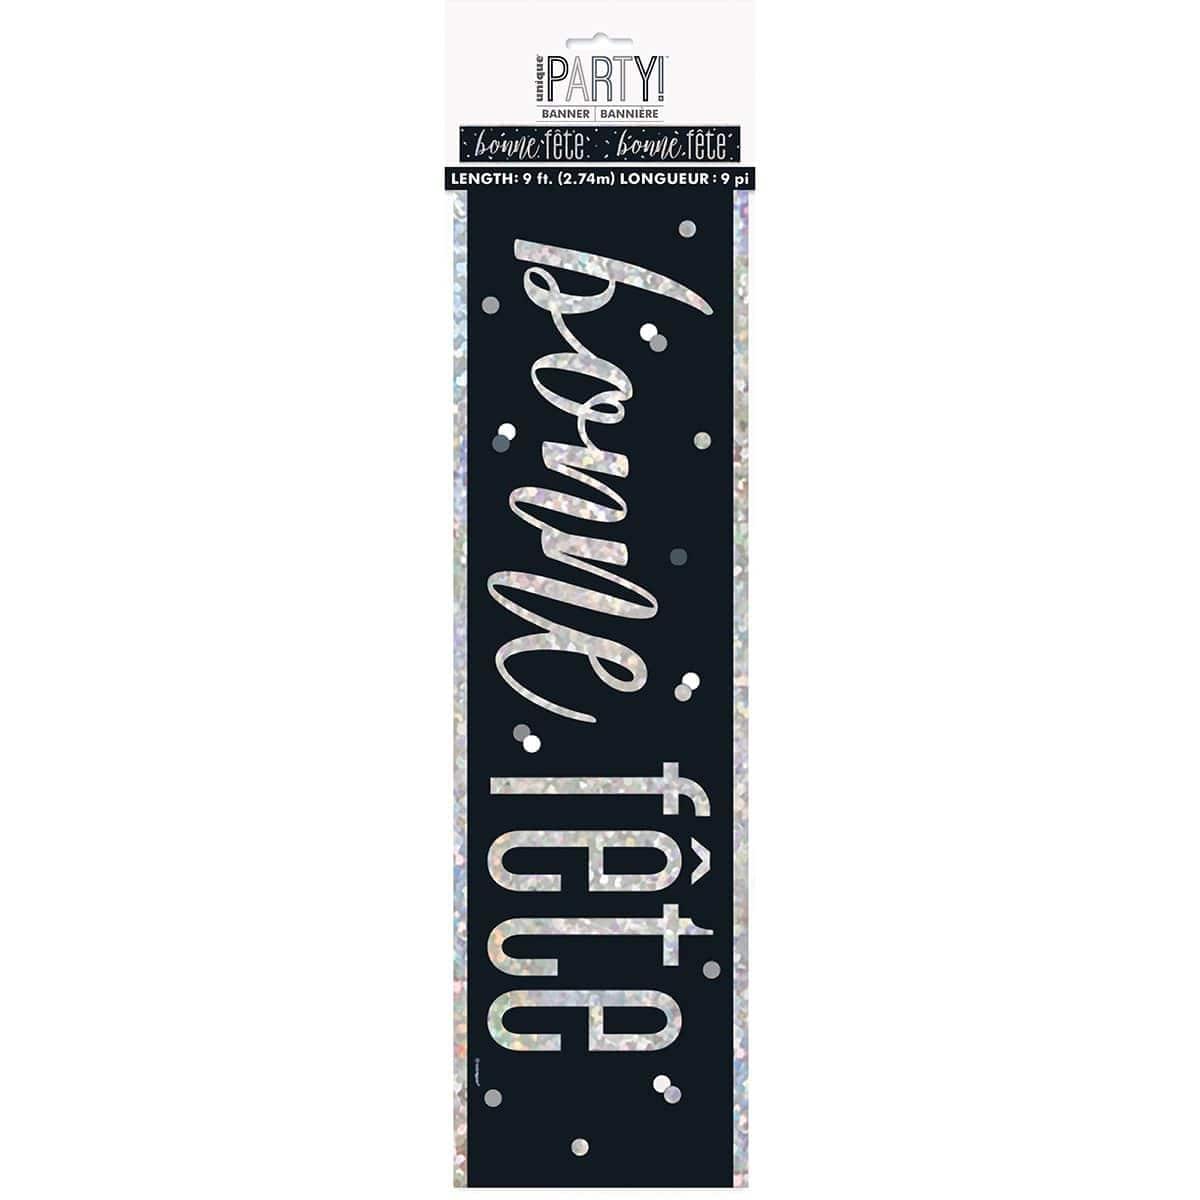 Buy Age Specific Birthday Bonne Fête Black/Silver - Foil Banner sold at Party Expert